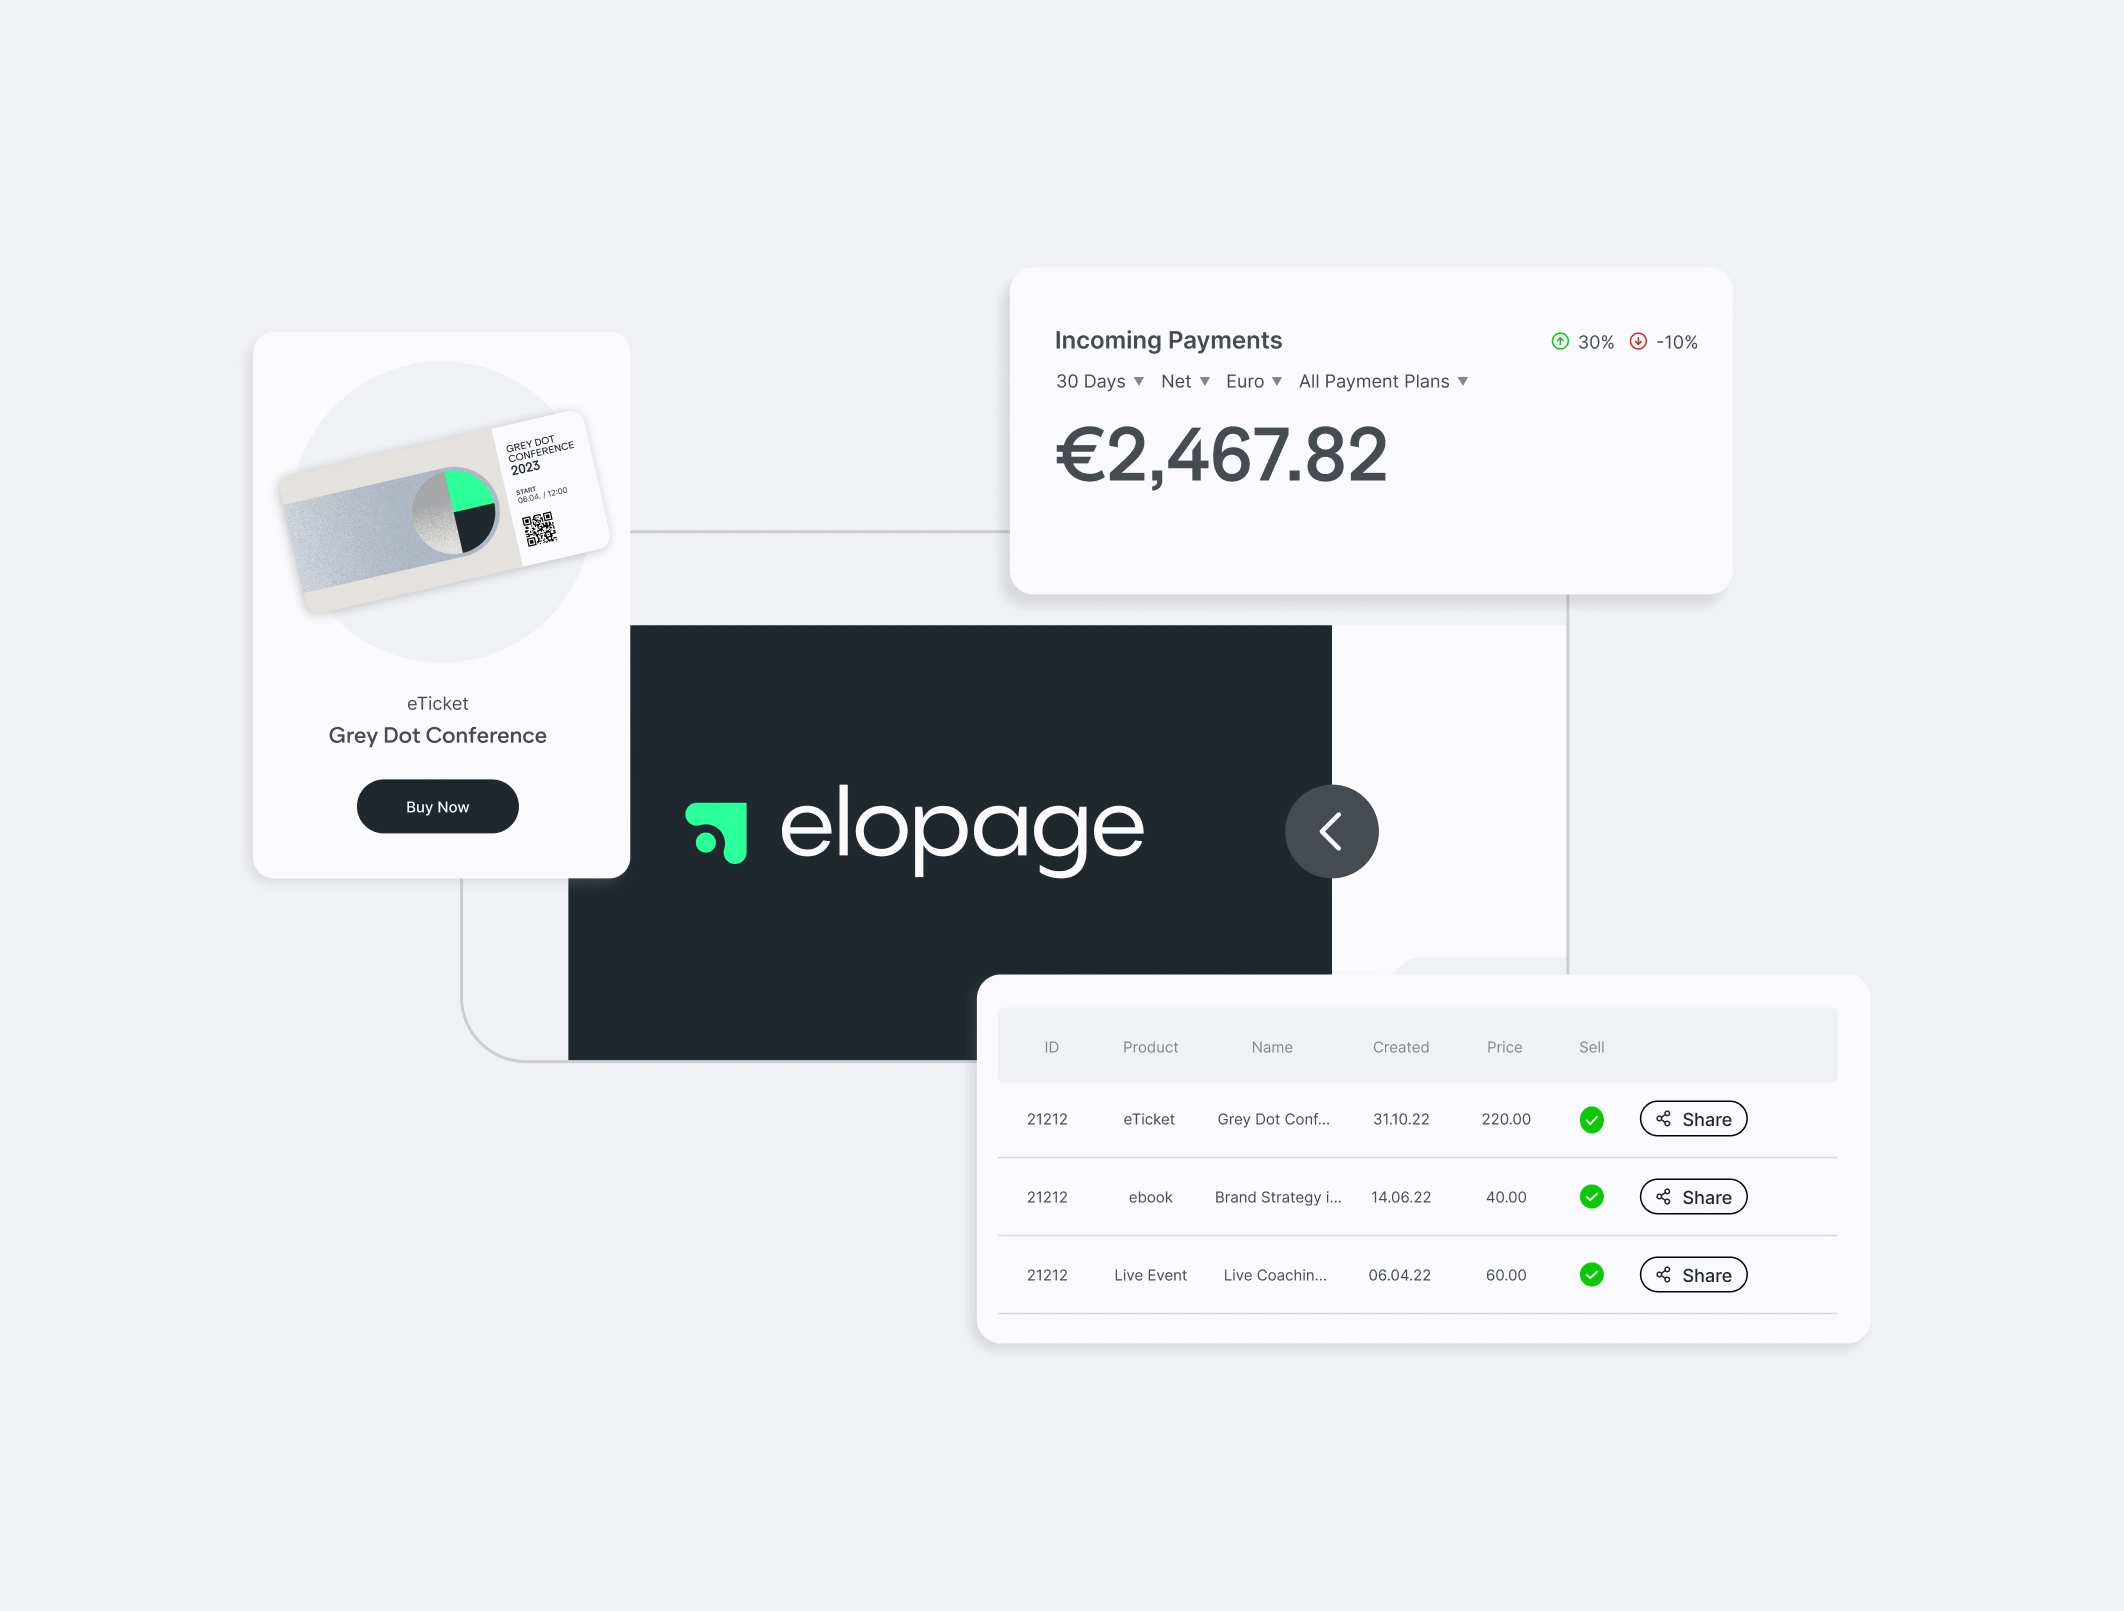 Snippets from the digital products dashboard in elopage